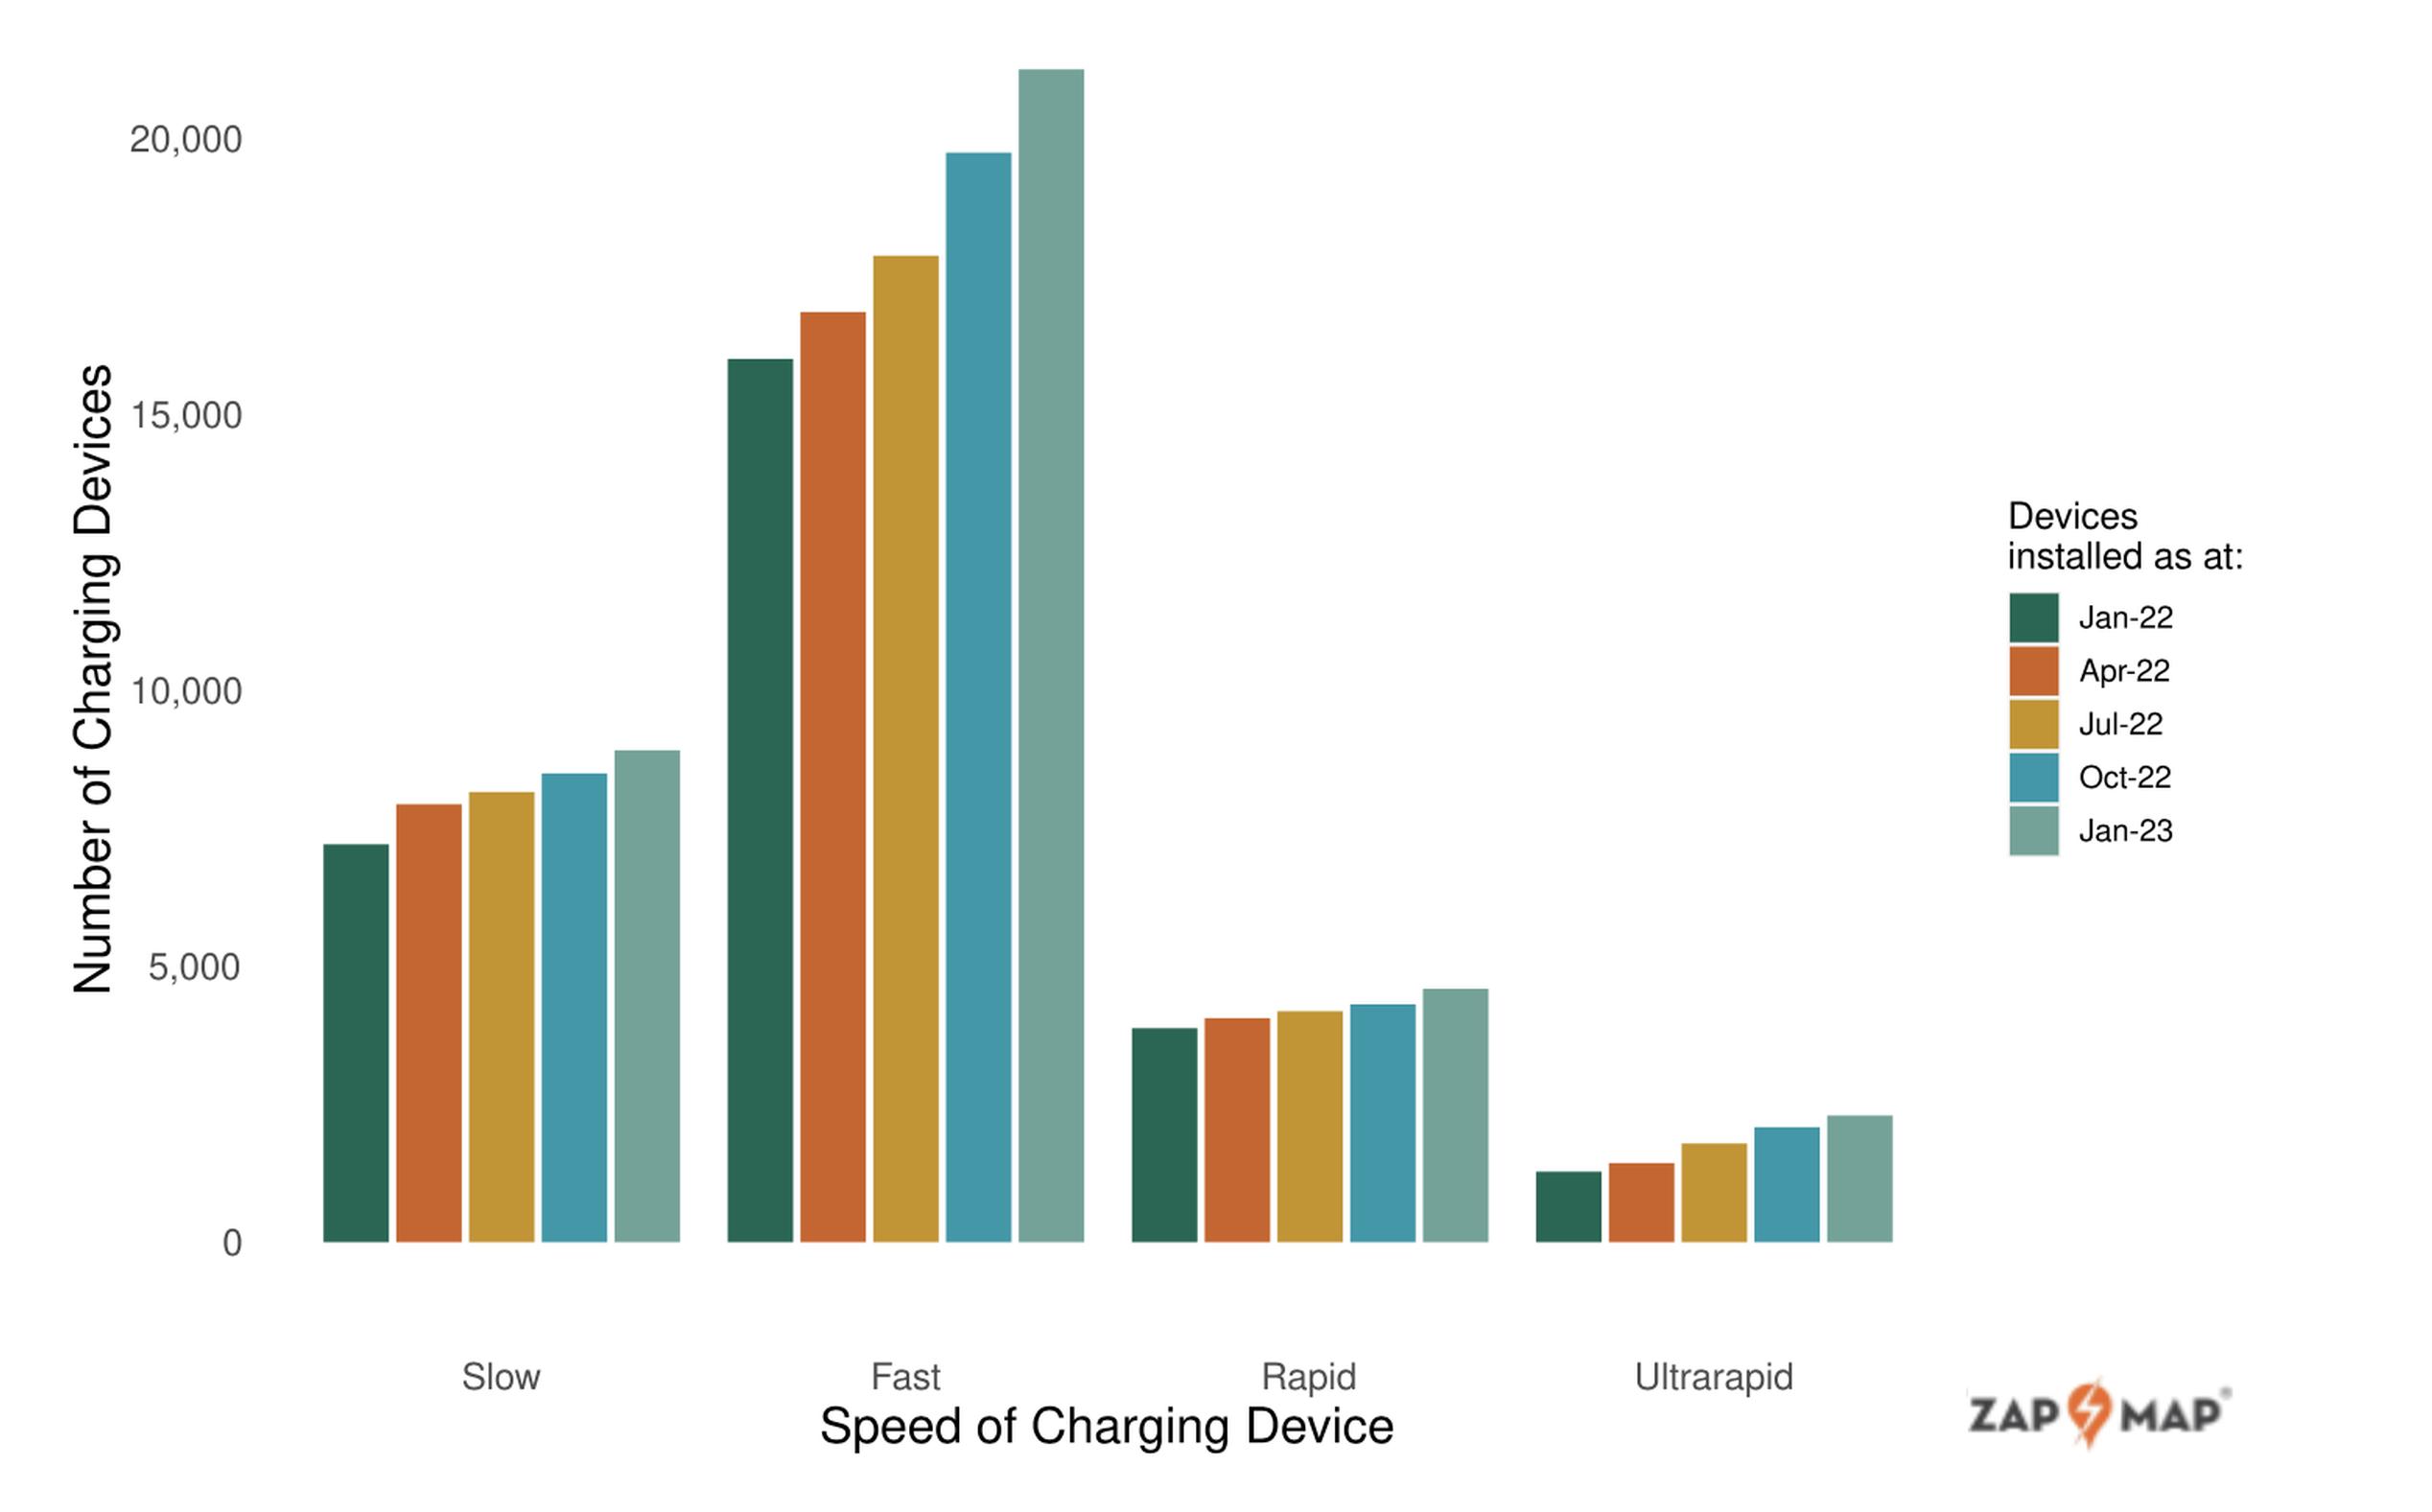 Public charging devices by charging speed, since 1 January 2022